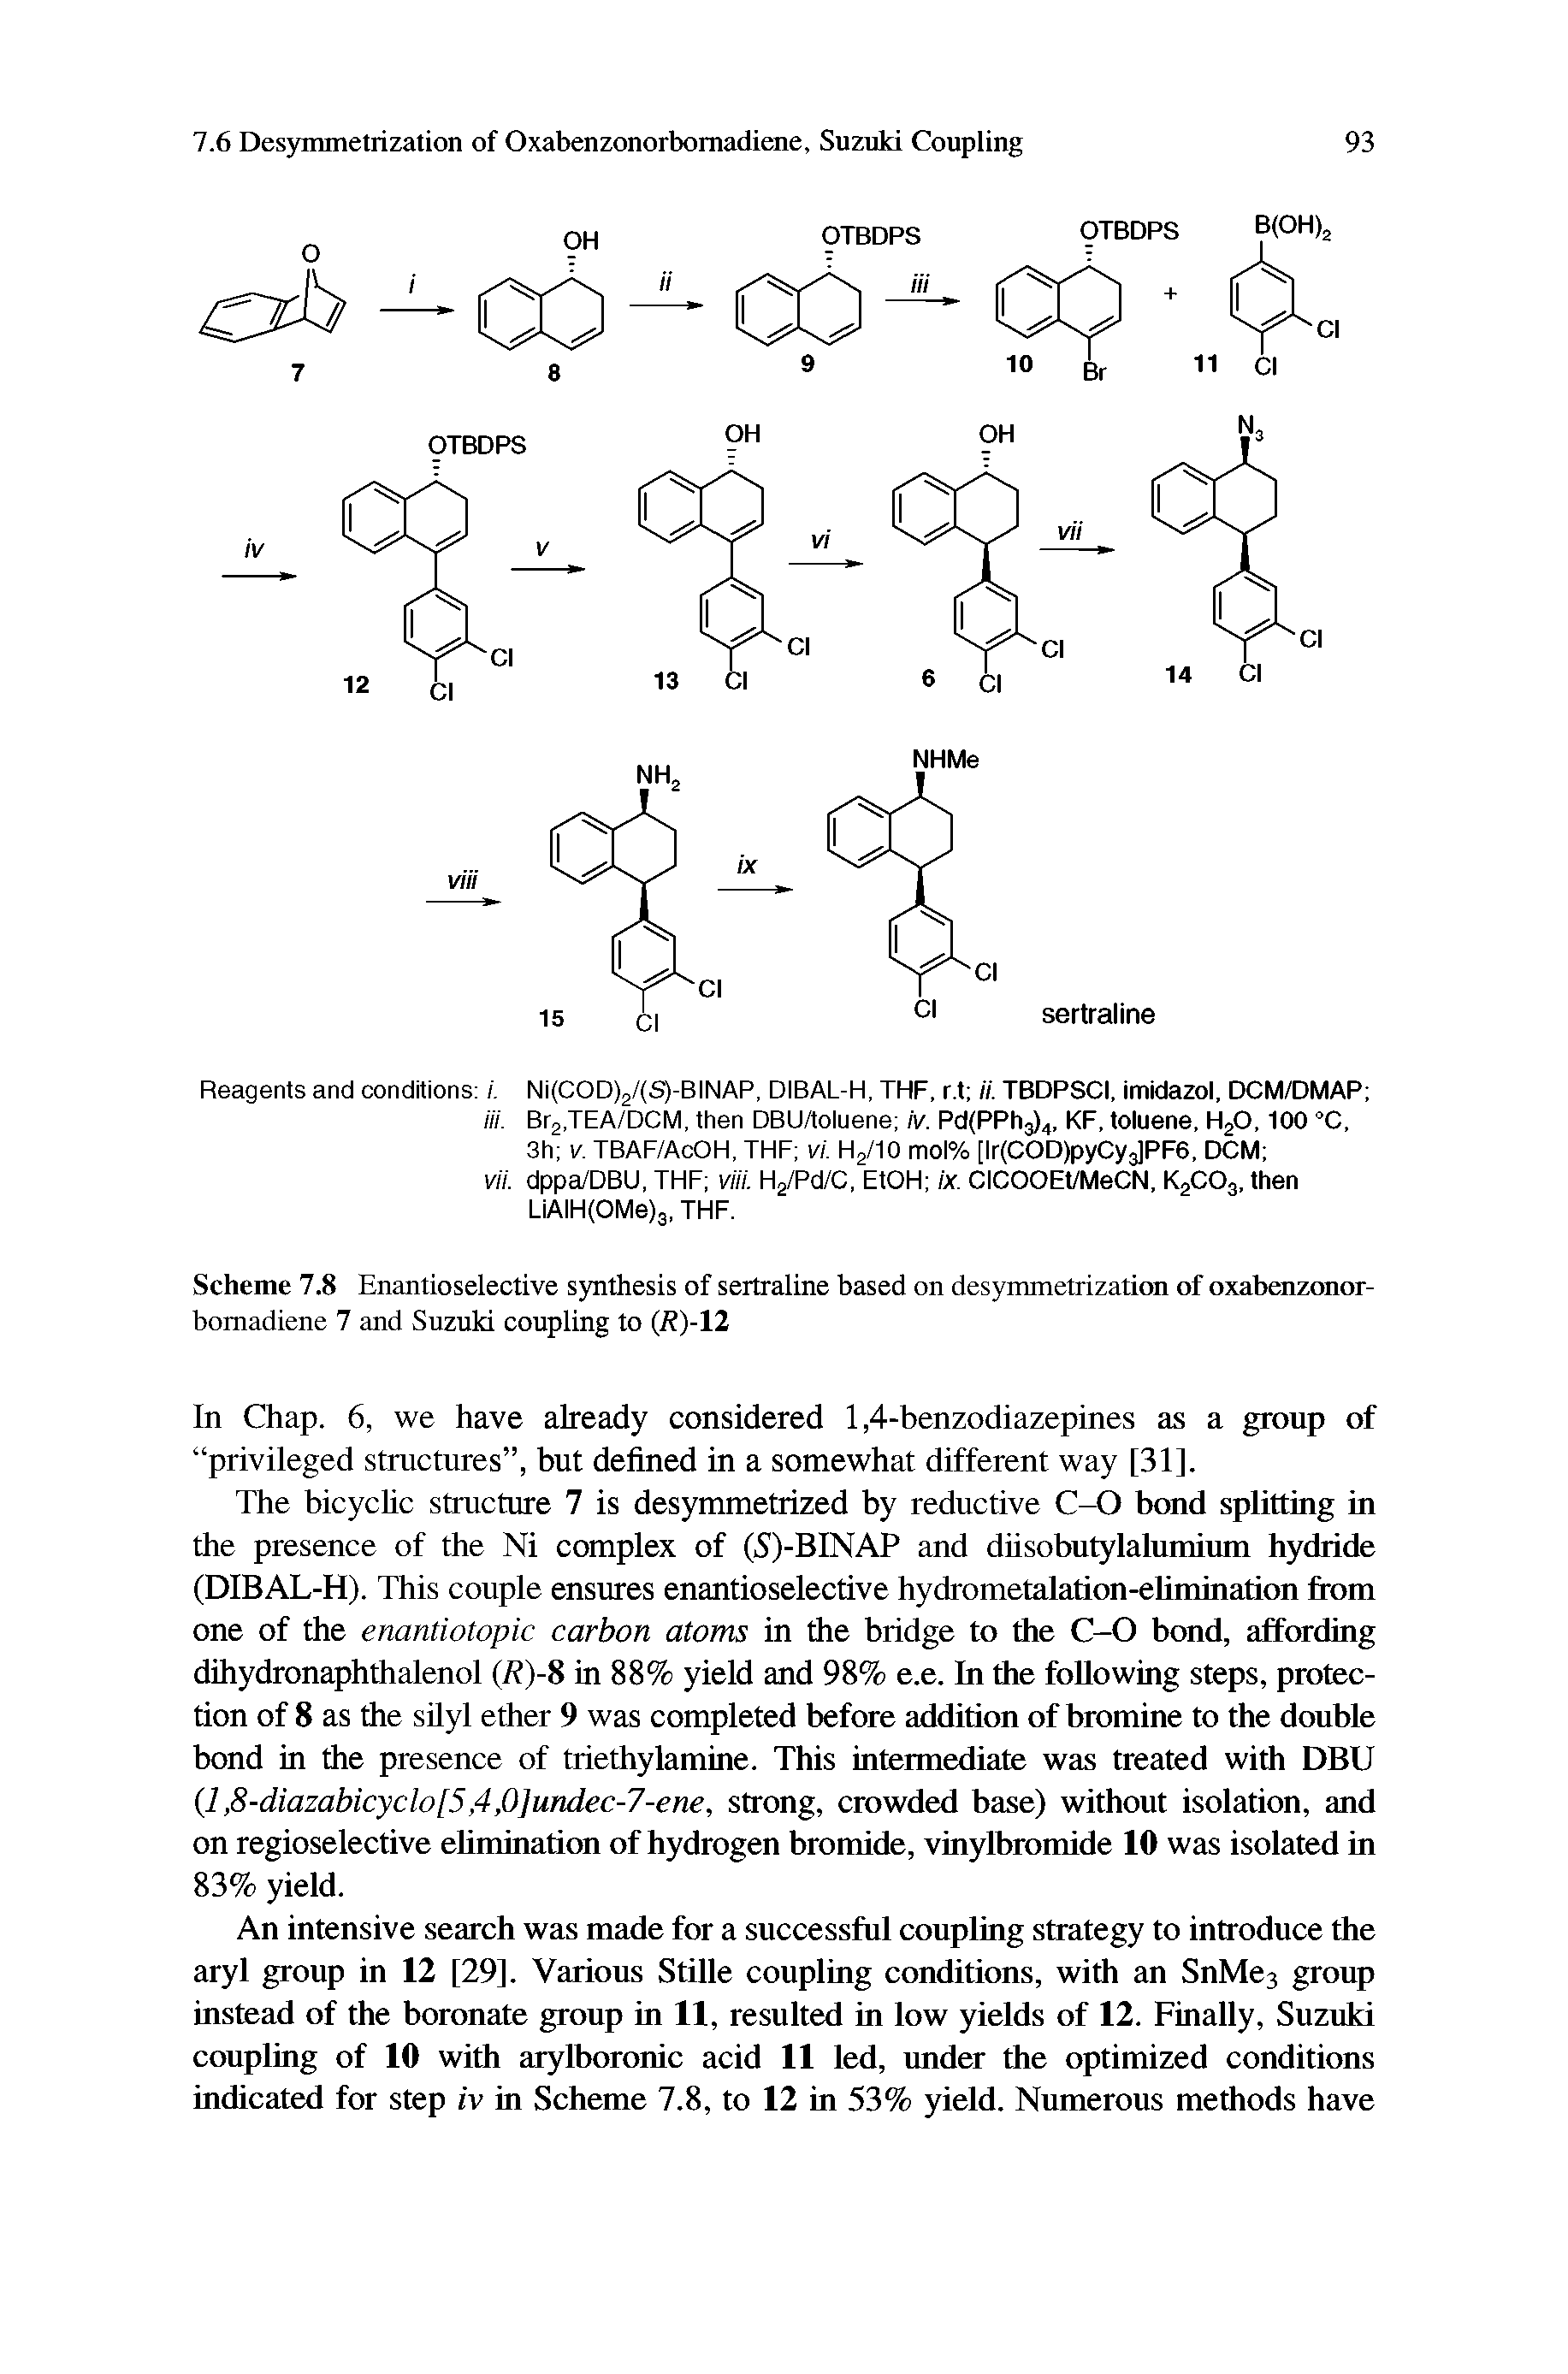 Scheme 7.8 Enantioselective synthesis of sertraline based on desynunetrization of oxabenzonorbomadiene 7 and Suzuki coupling to (R)-12...